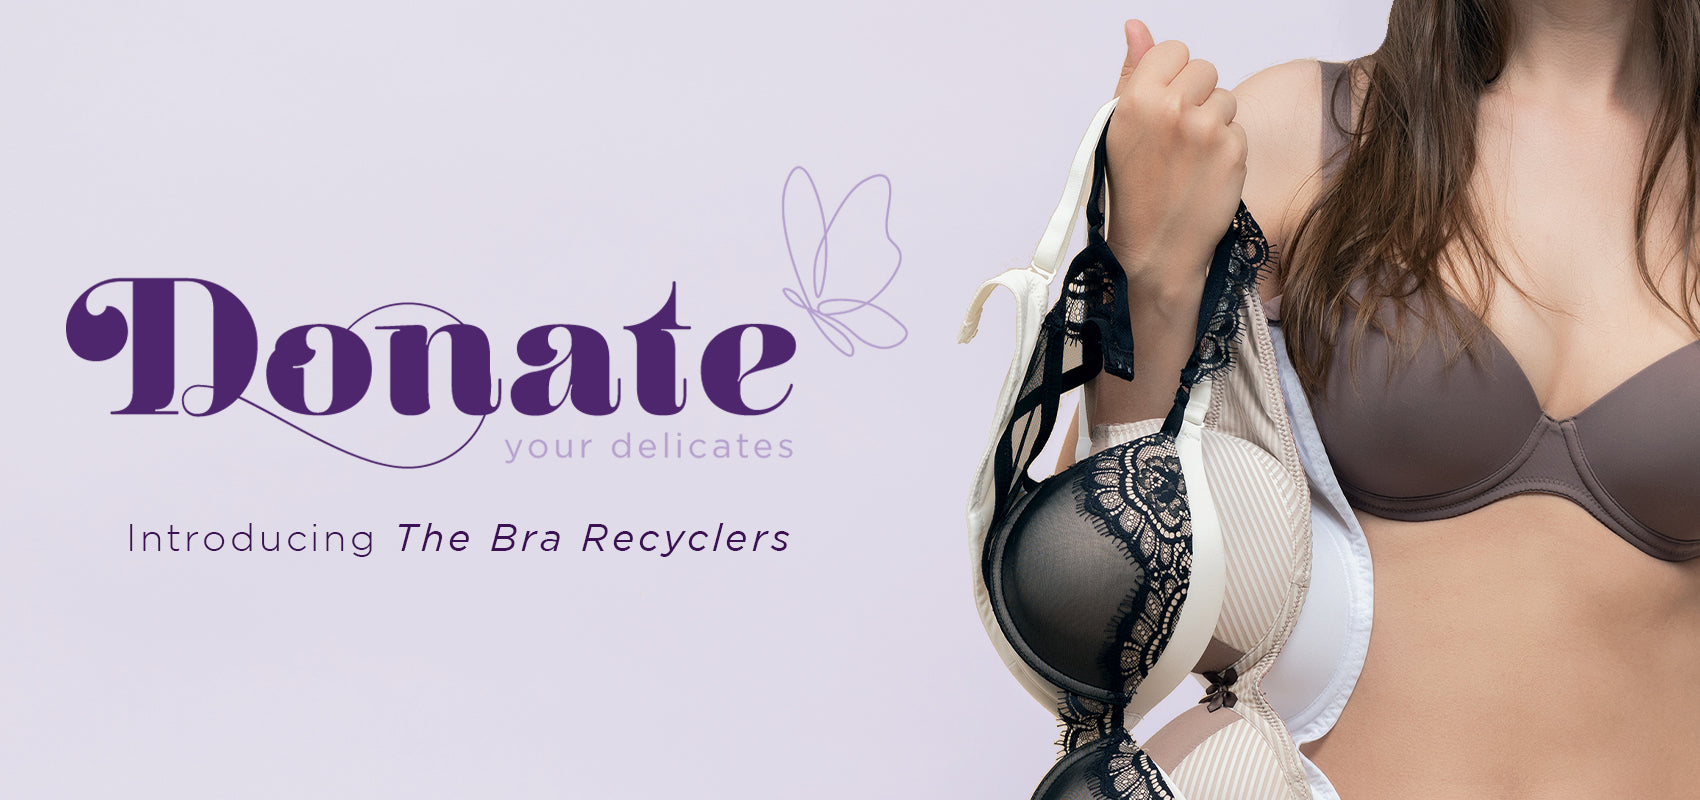 Donate Your Bra: Introducing The Bra Recyclers